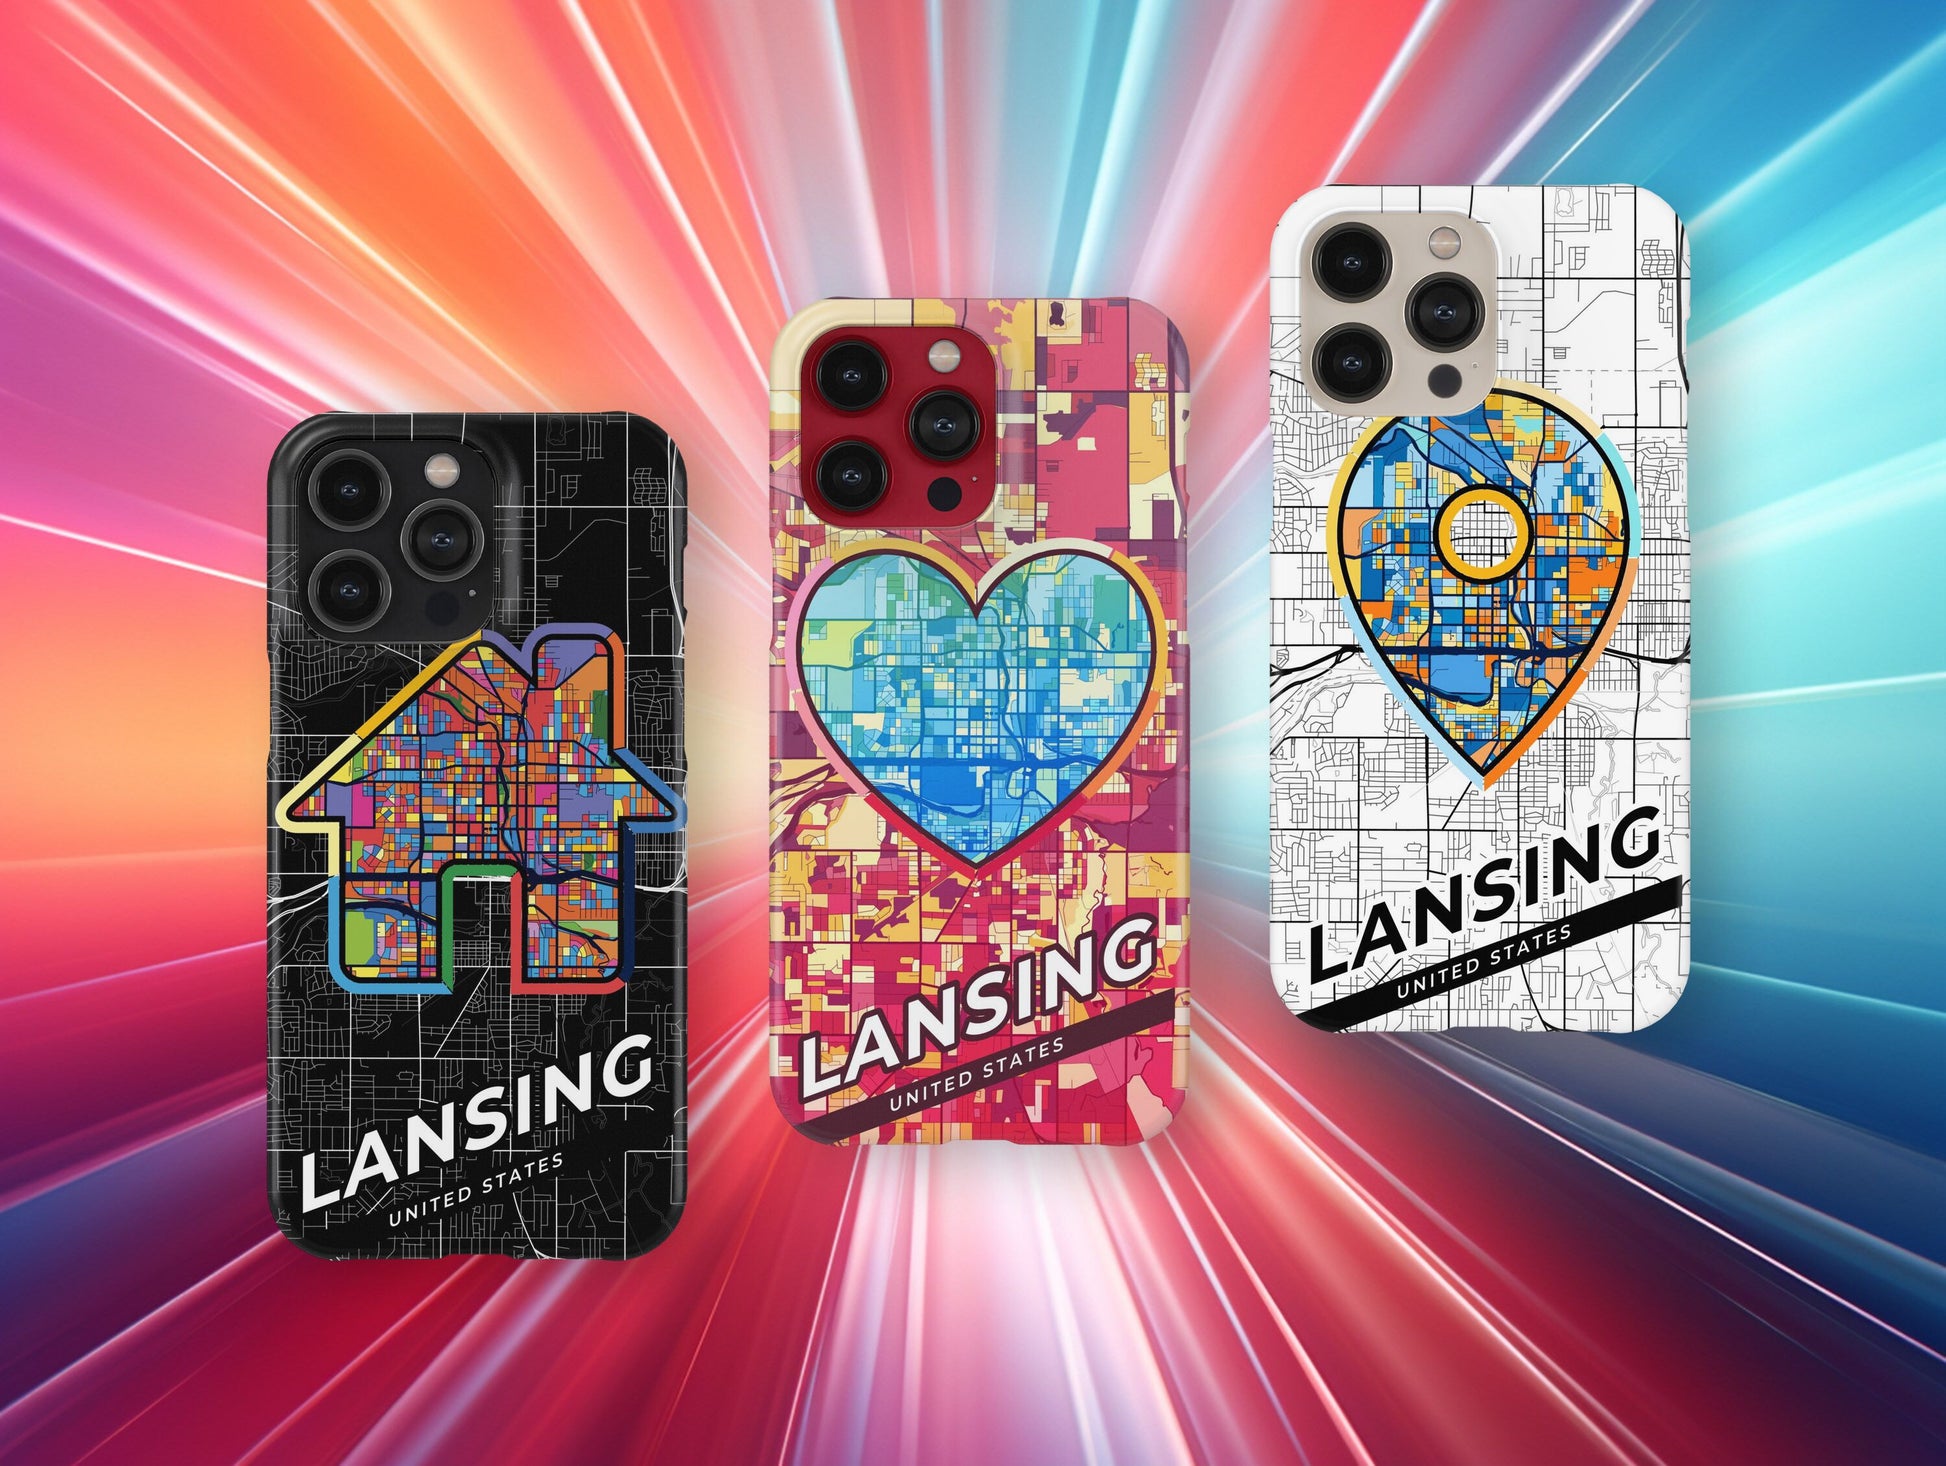 Lansing Michigan slim phone case with colorful icon. Birthday, wedding or housewarming gift. Couple match cases.